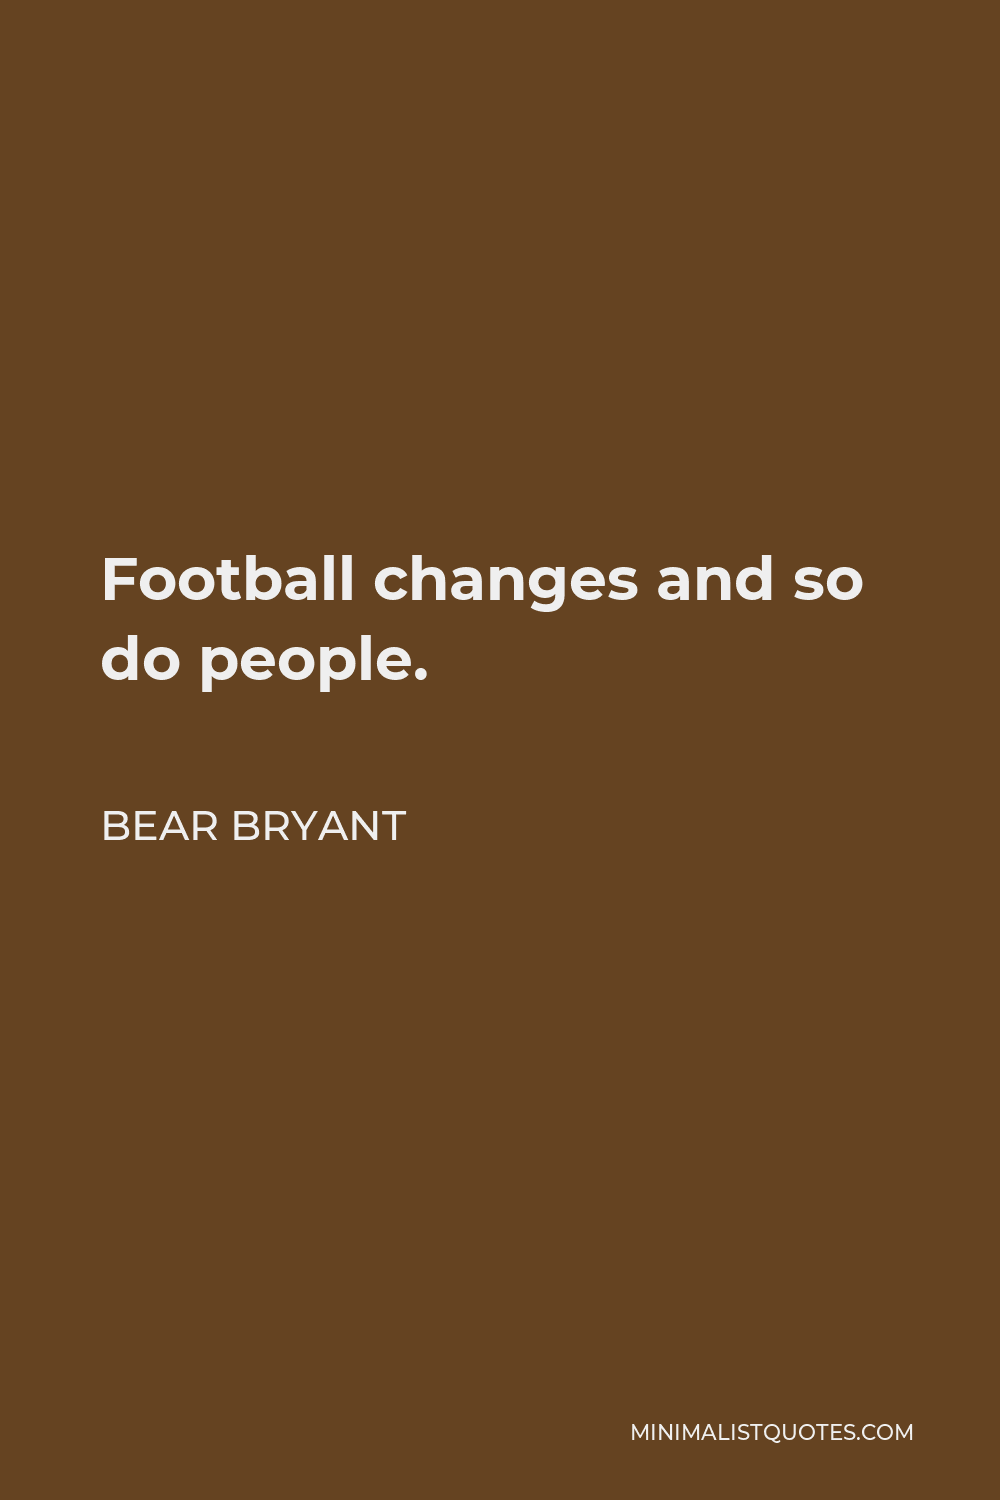 Bear Bryant Quote - Football changes and so do people.